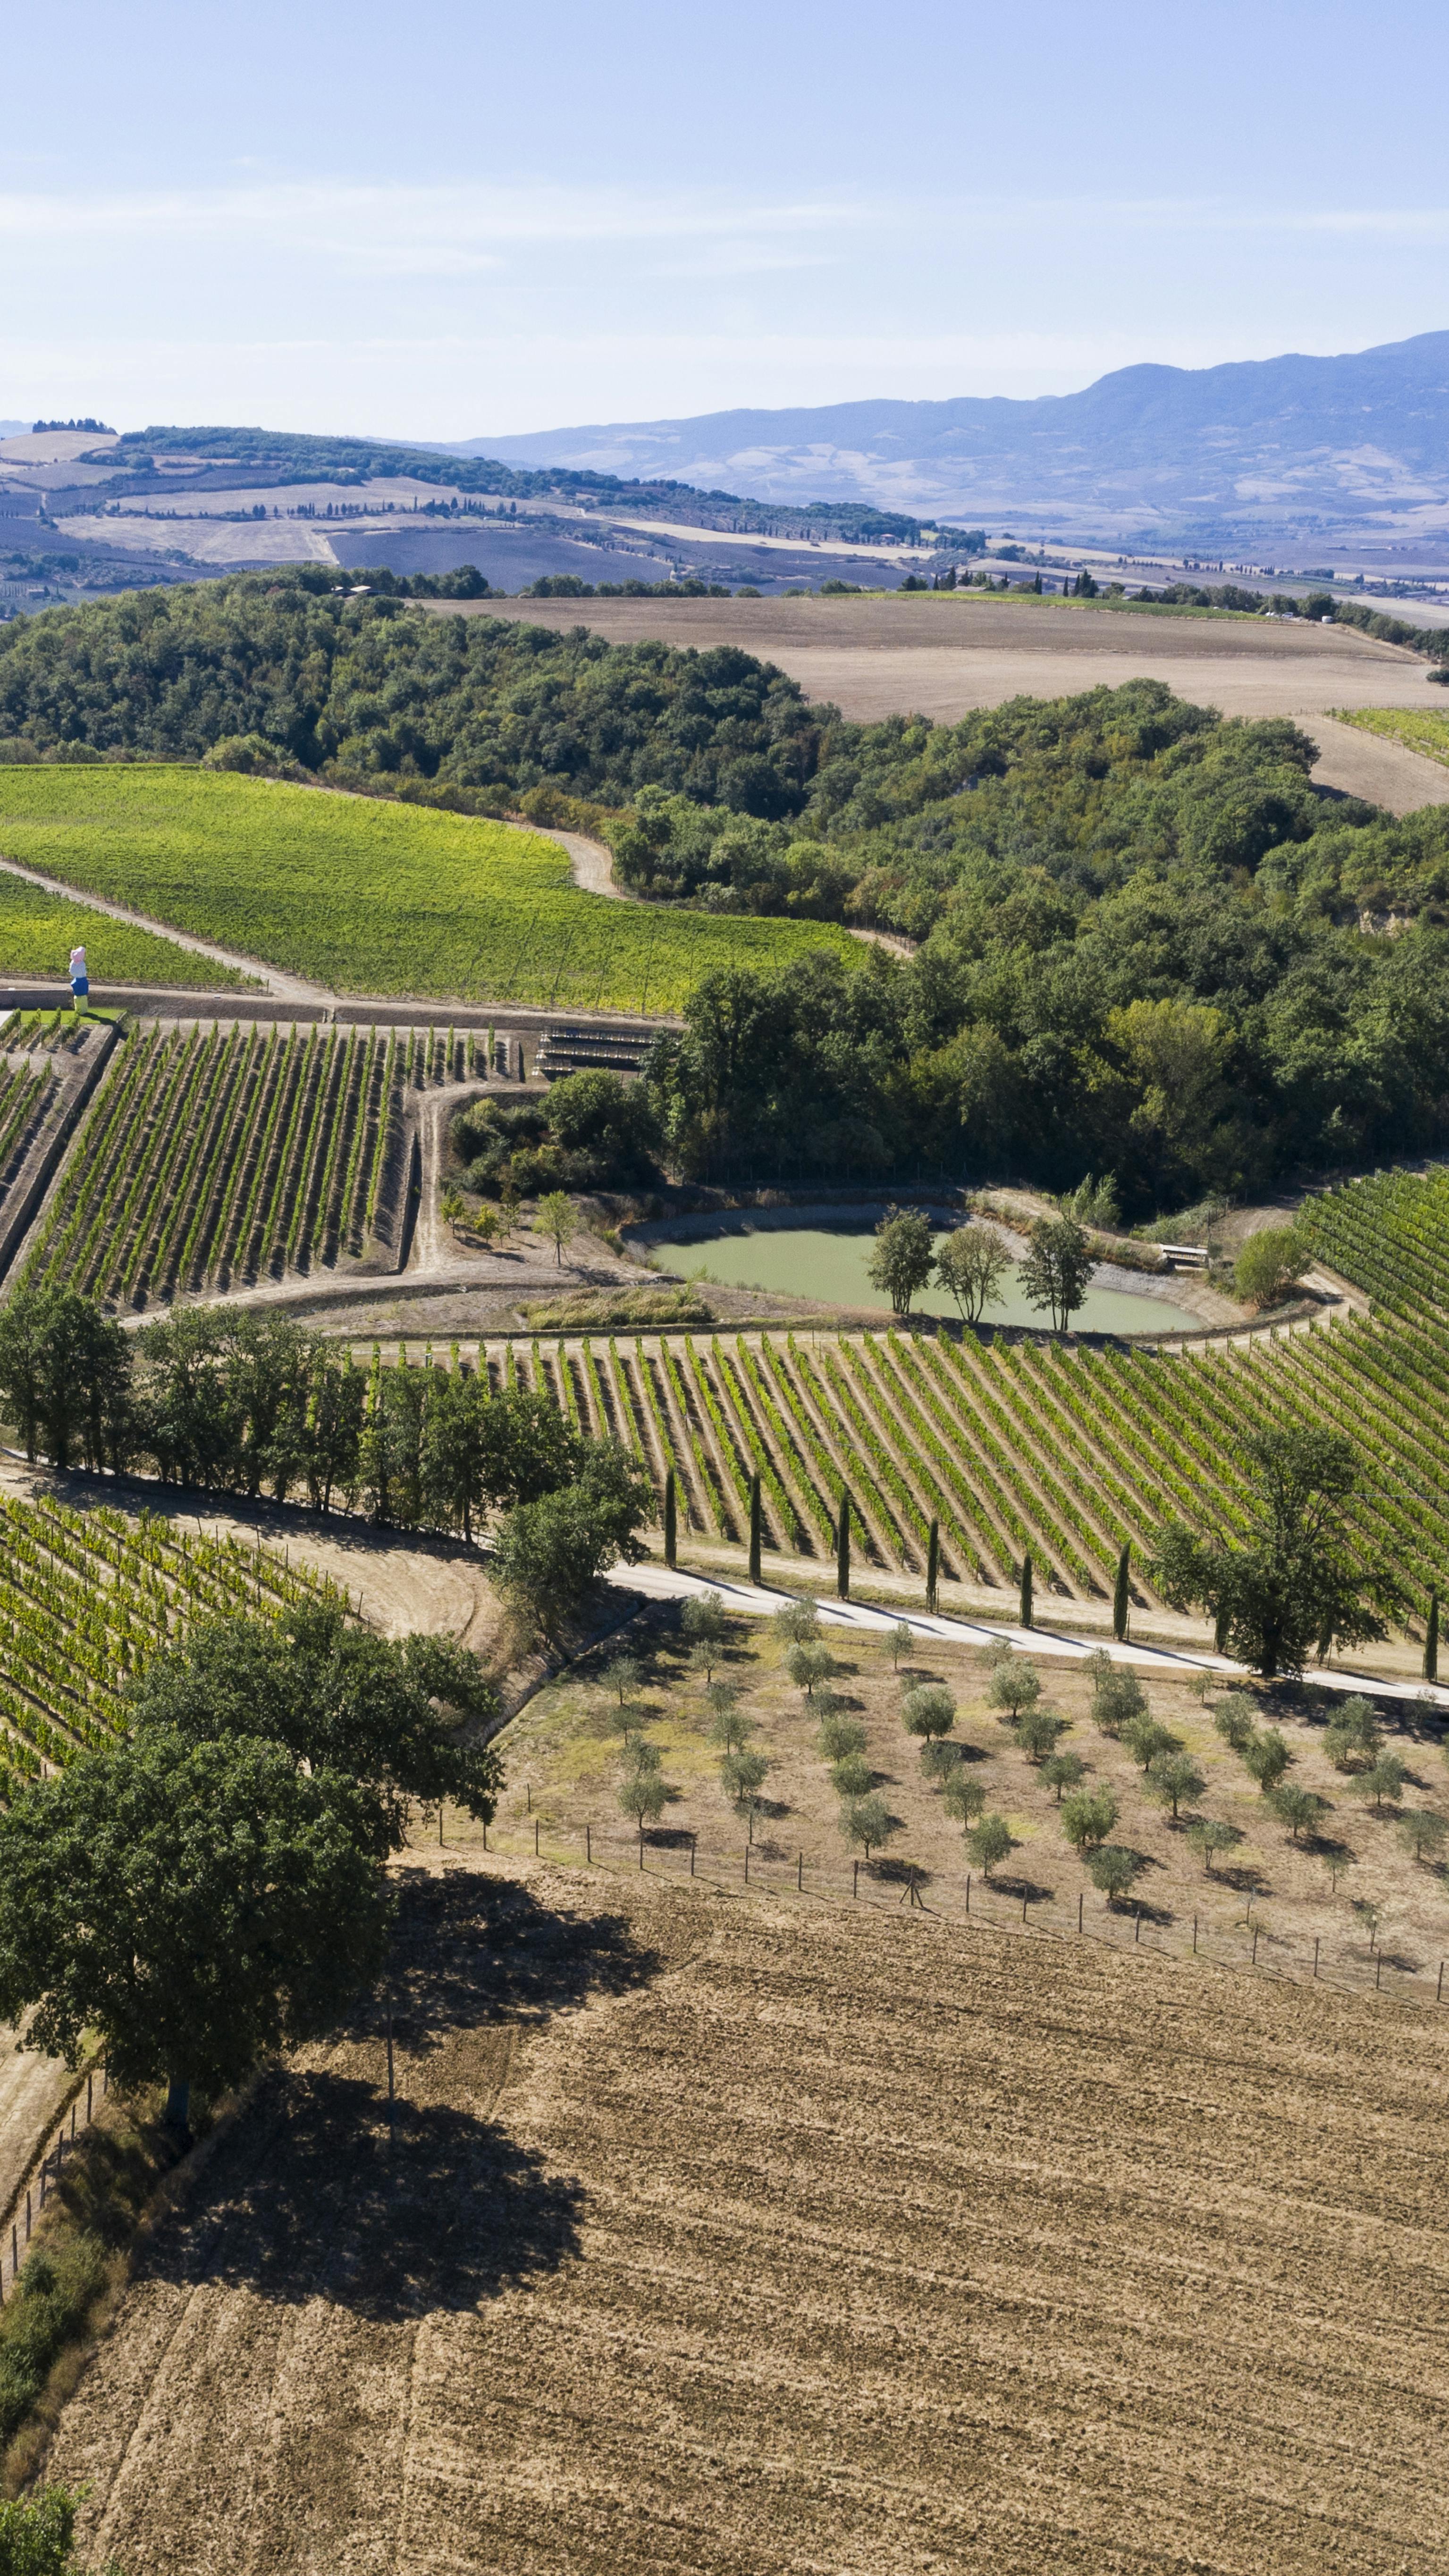 Aerial view by dron on winery vinyards and monte amiata